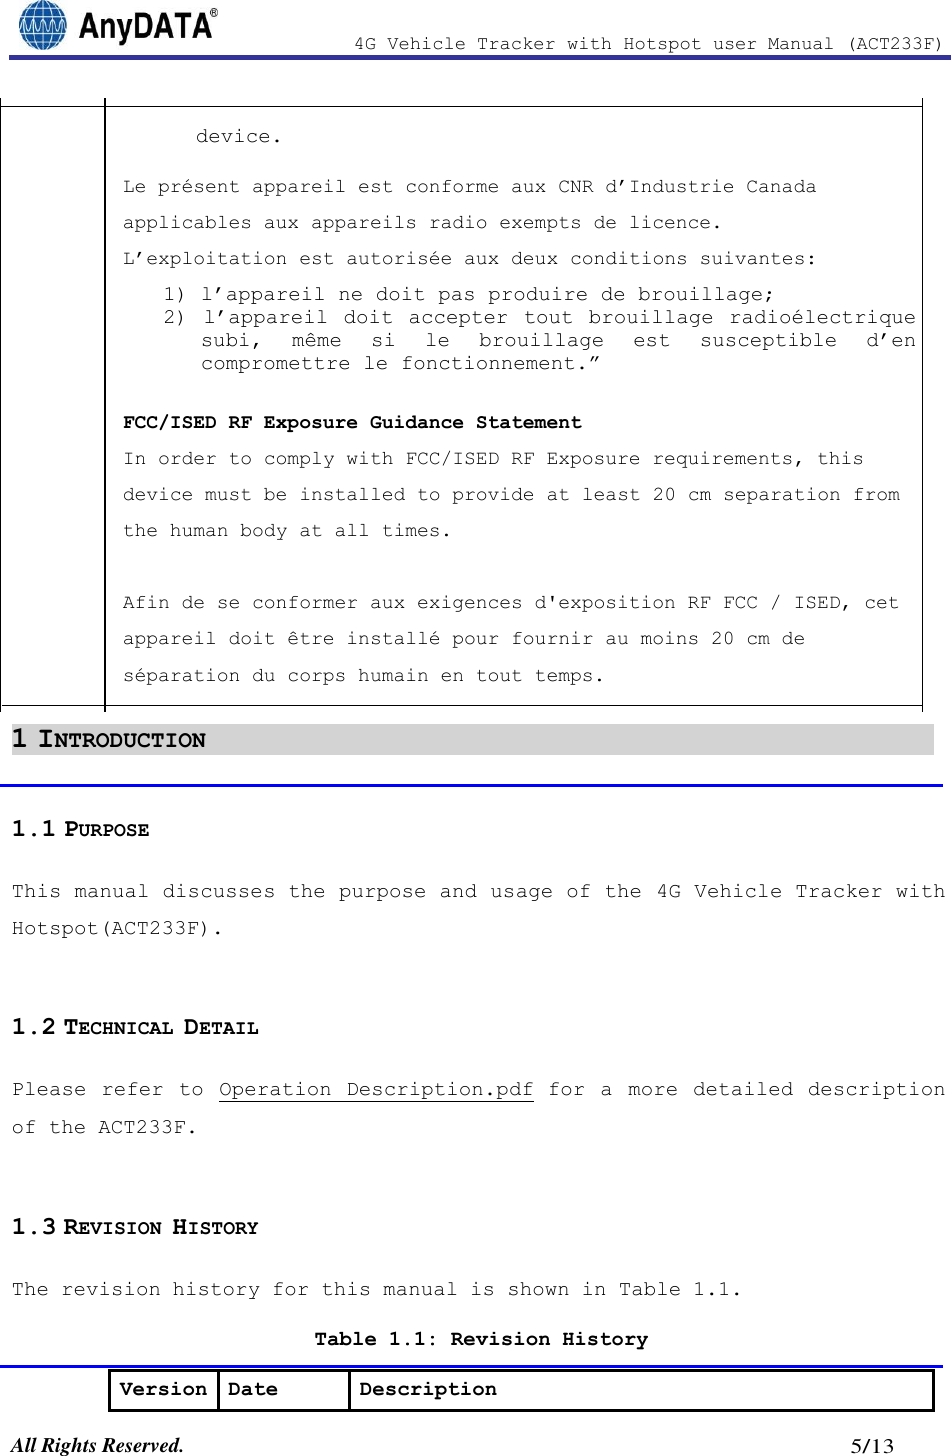 Page 5 of AnyDATA ACT233F 4G Vehicle Tracker with Hotspot User Manual 